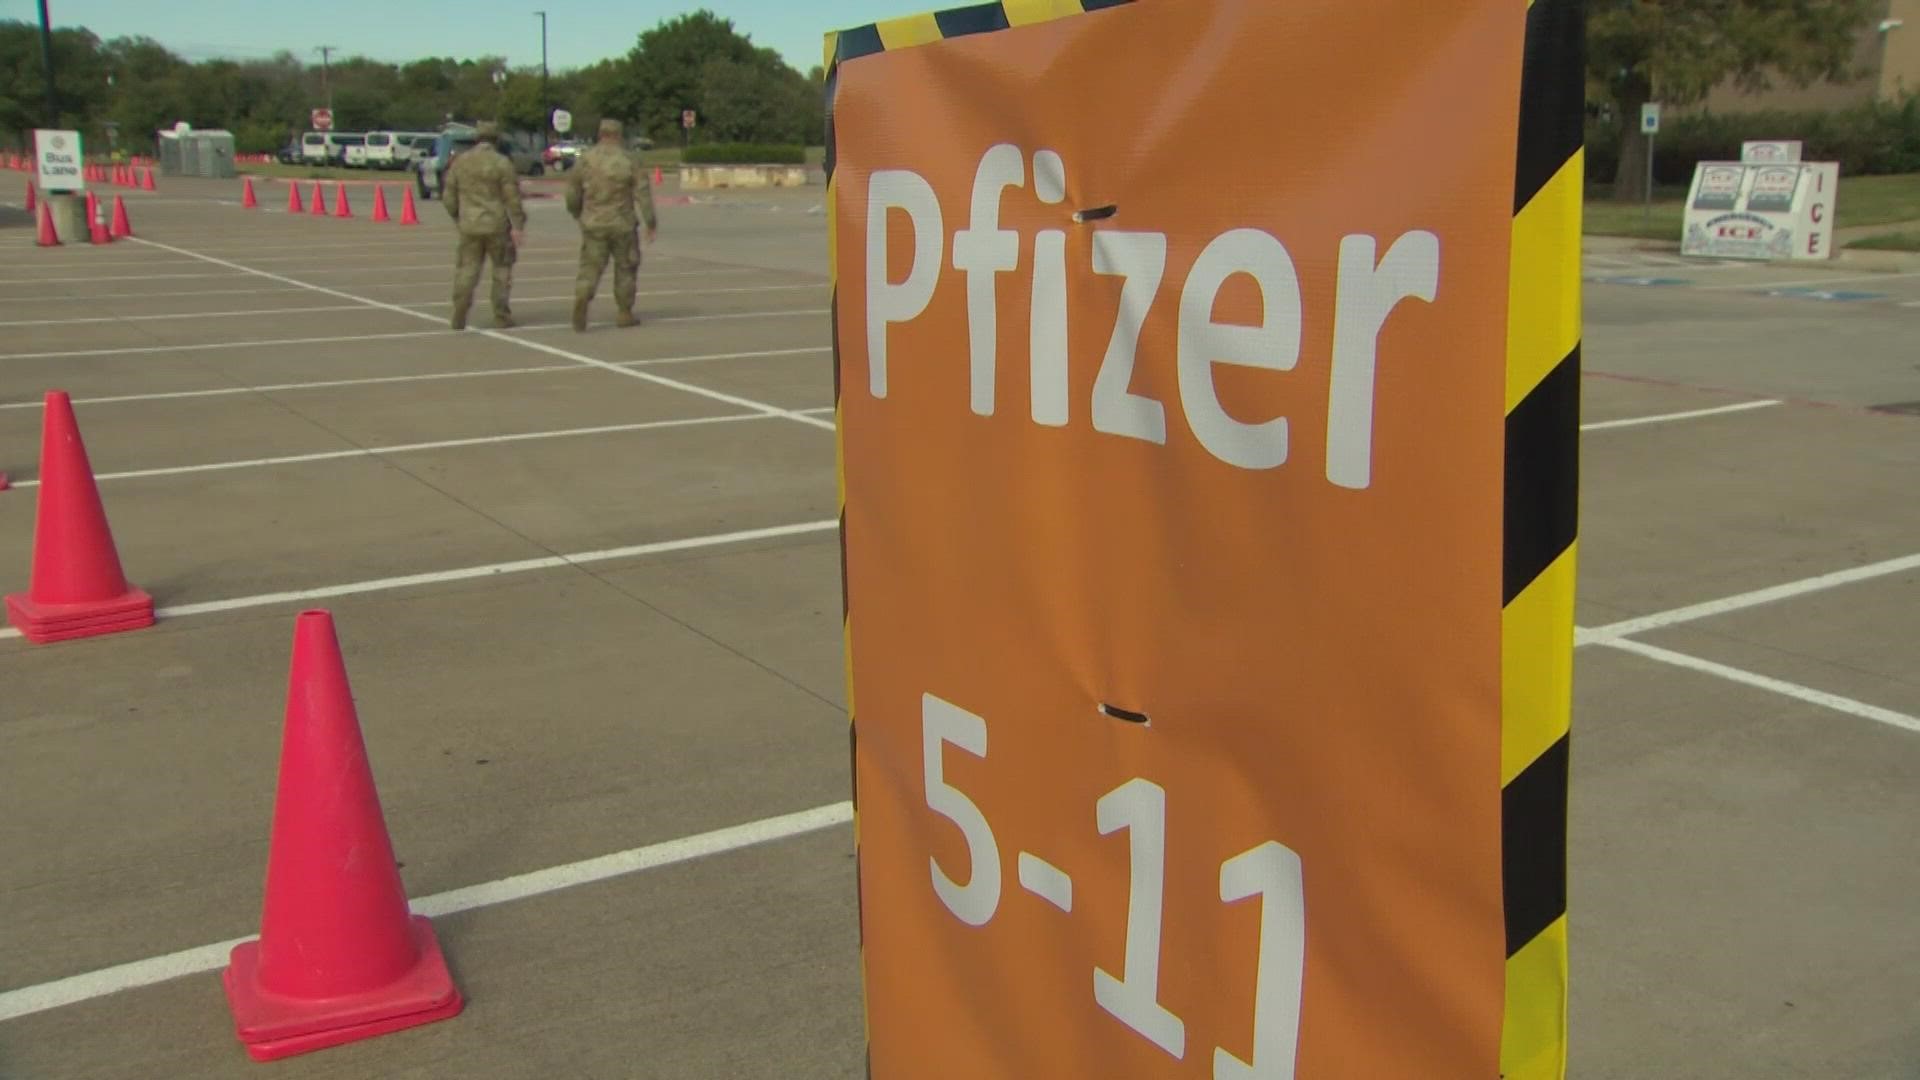 It was the first weekend that the Pfizer vaccine was available to children ages 5 to 11 in North Texas.